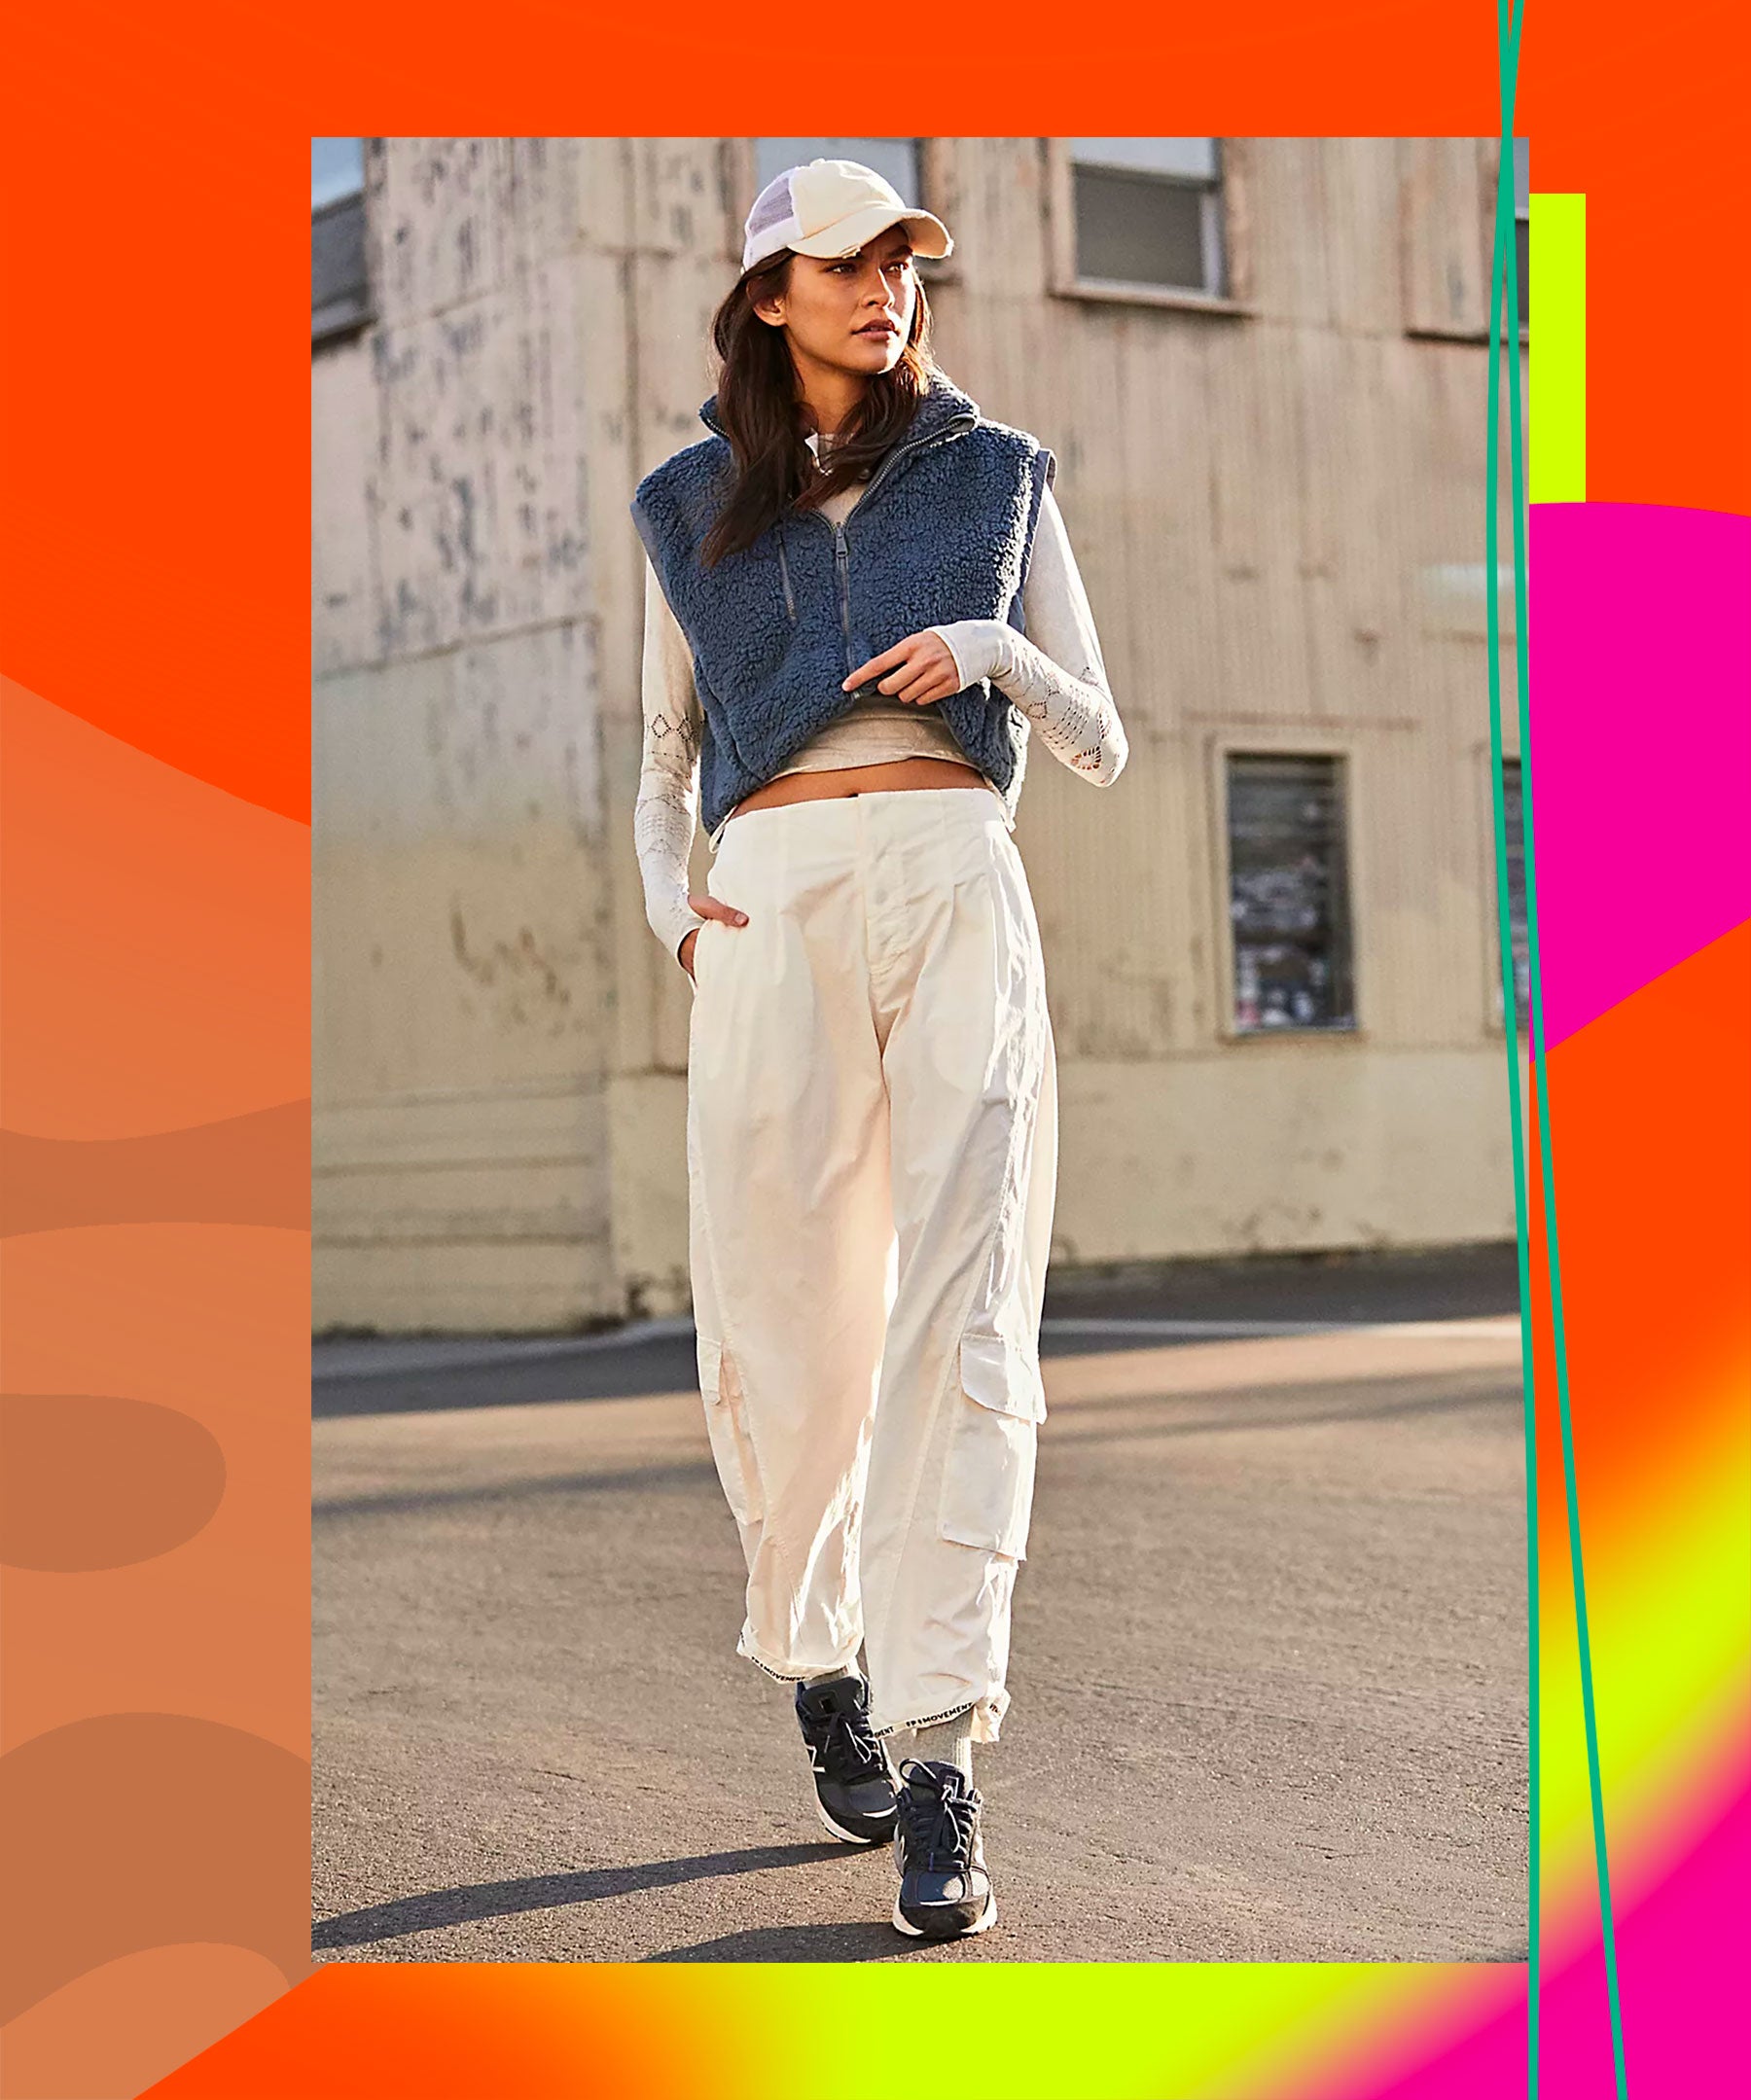 Women's Casual Wide Leg Pants High Waisted Self Tie Belted Straight Long  Loose Palazzo Work Trousers Dress Pants Womens Clothes - Walmart.com